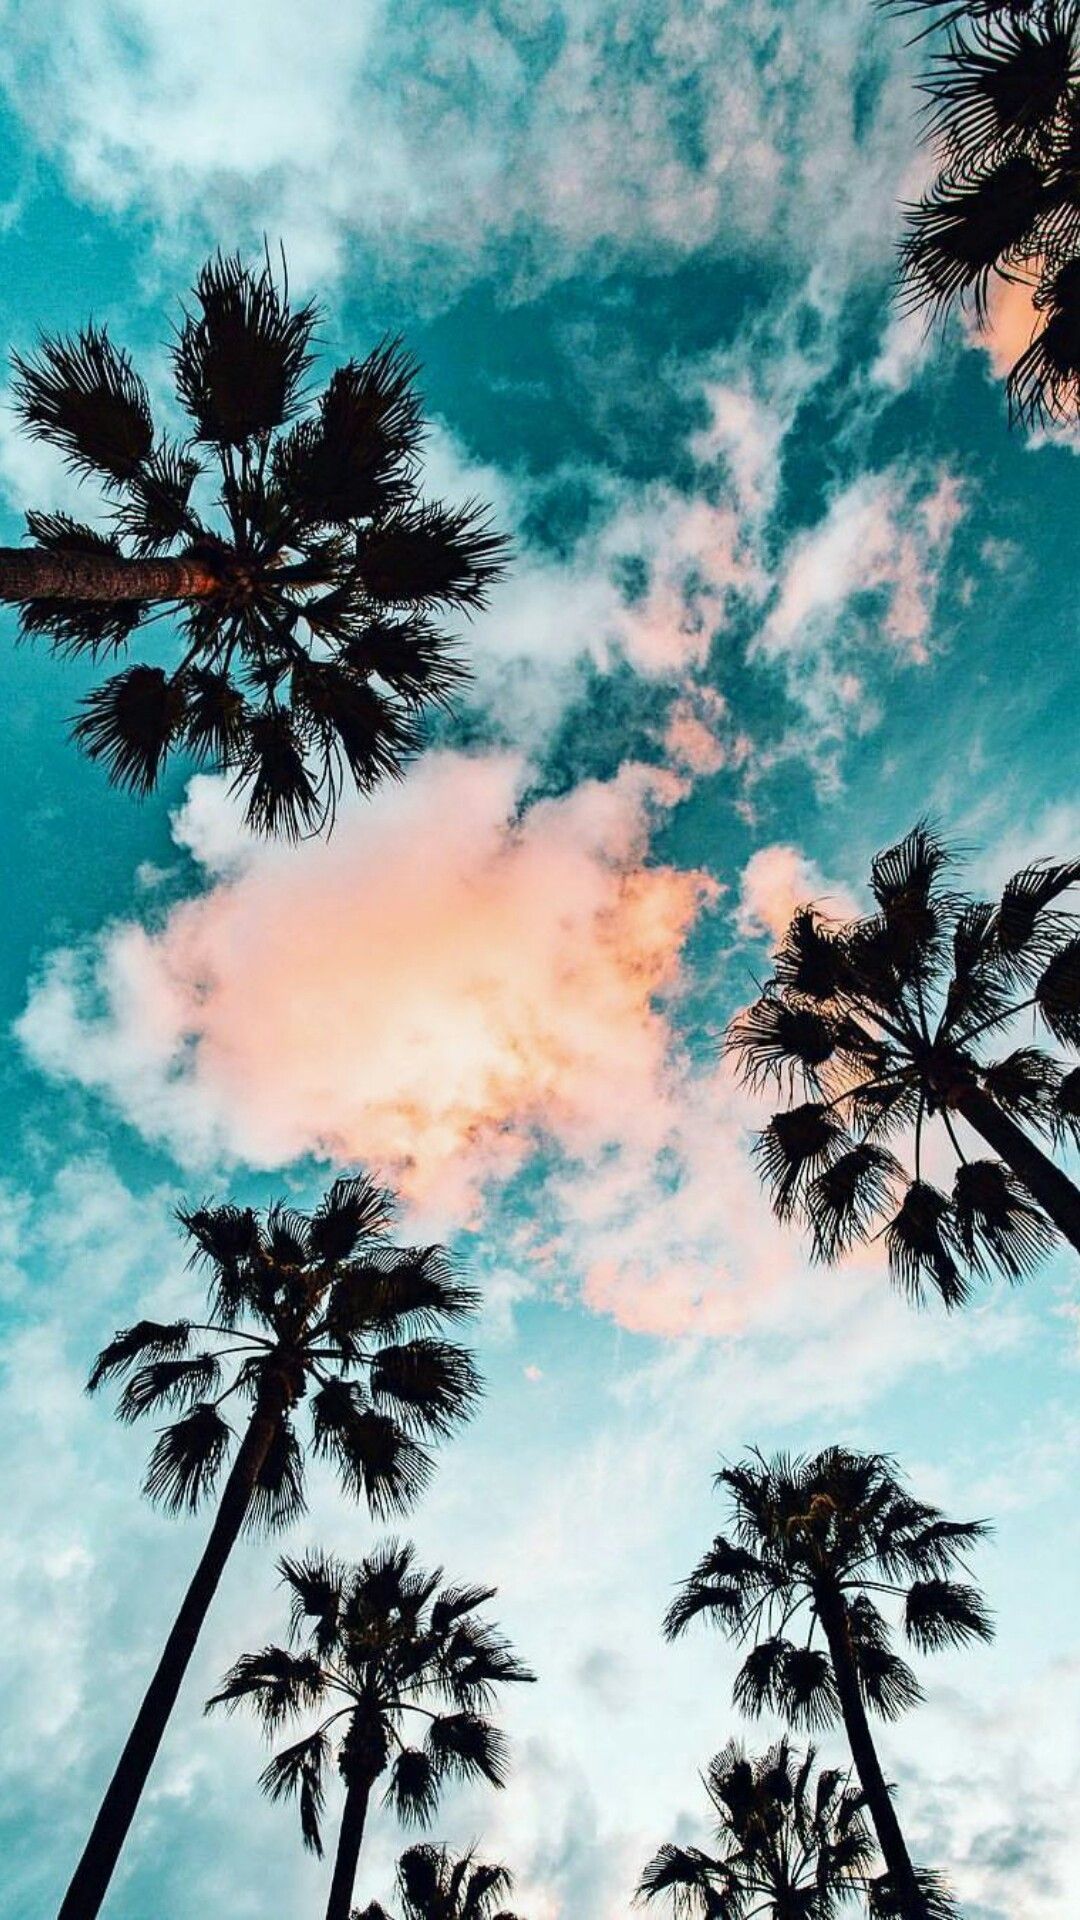 Palm Tree Iphone Wallpapers